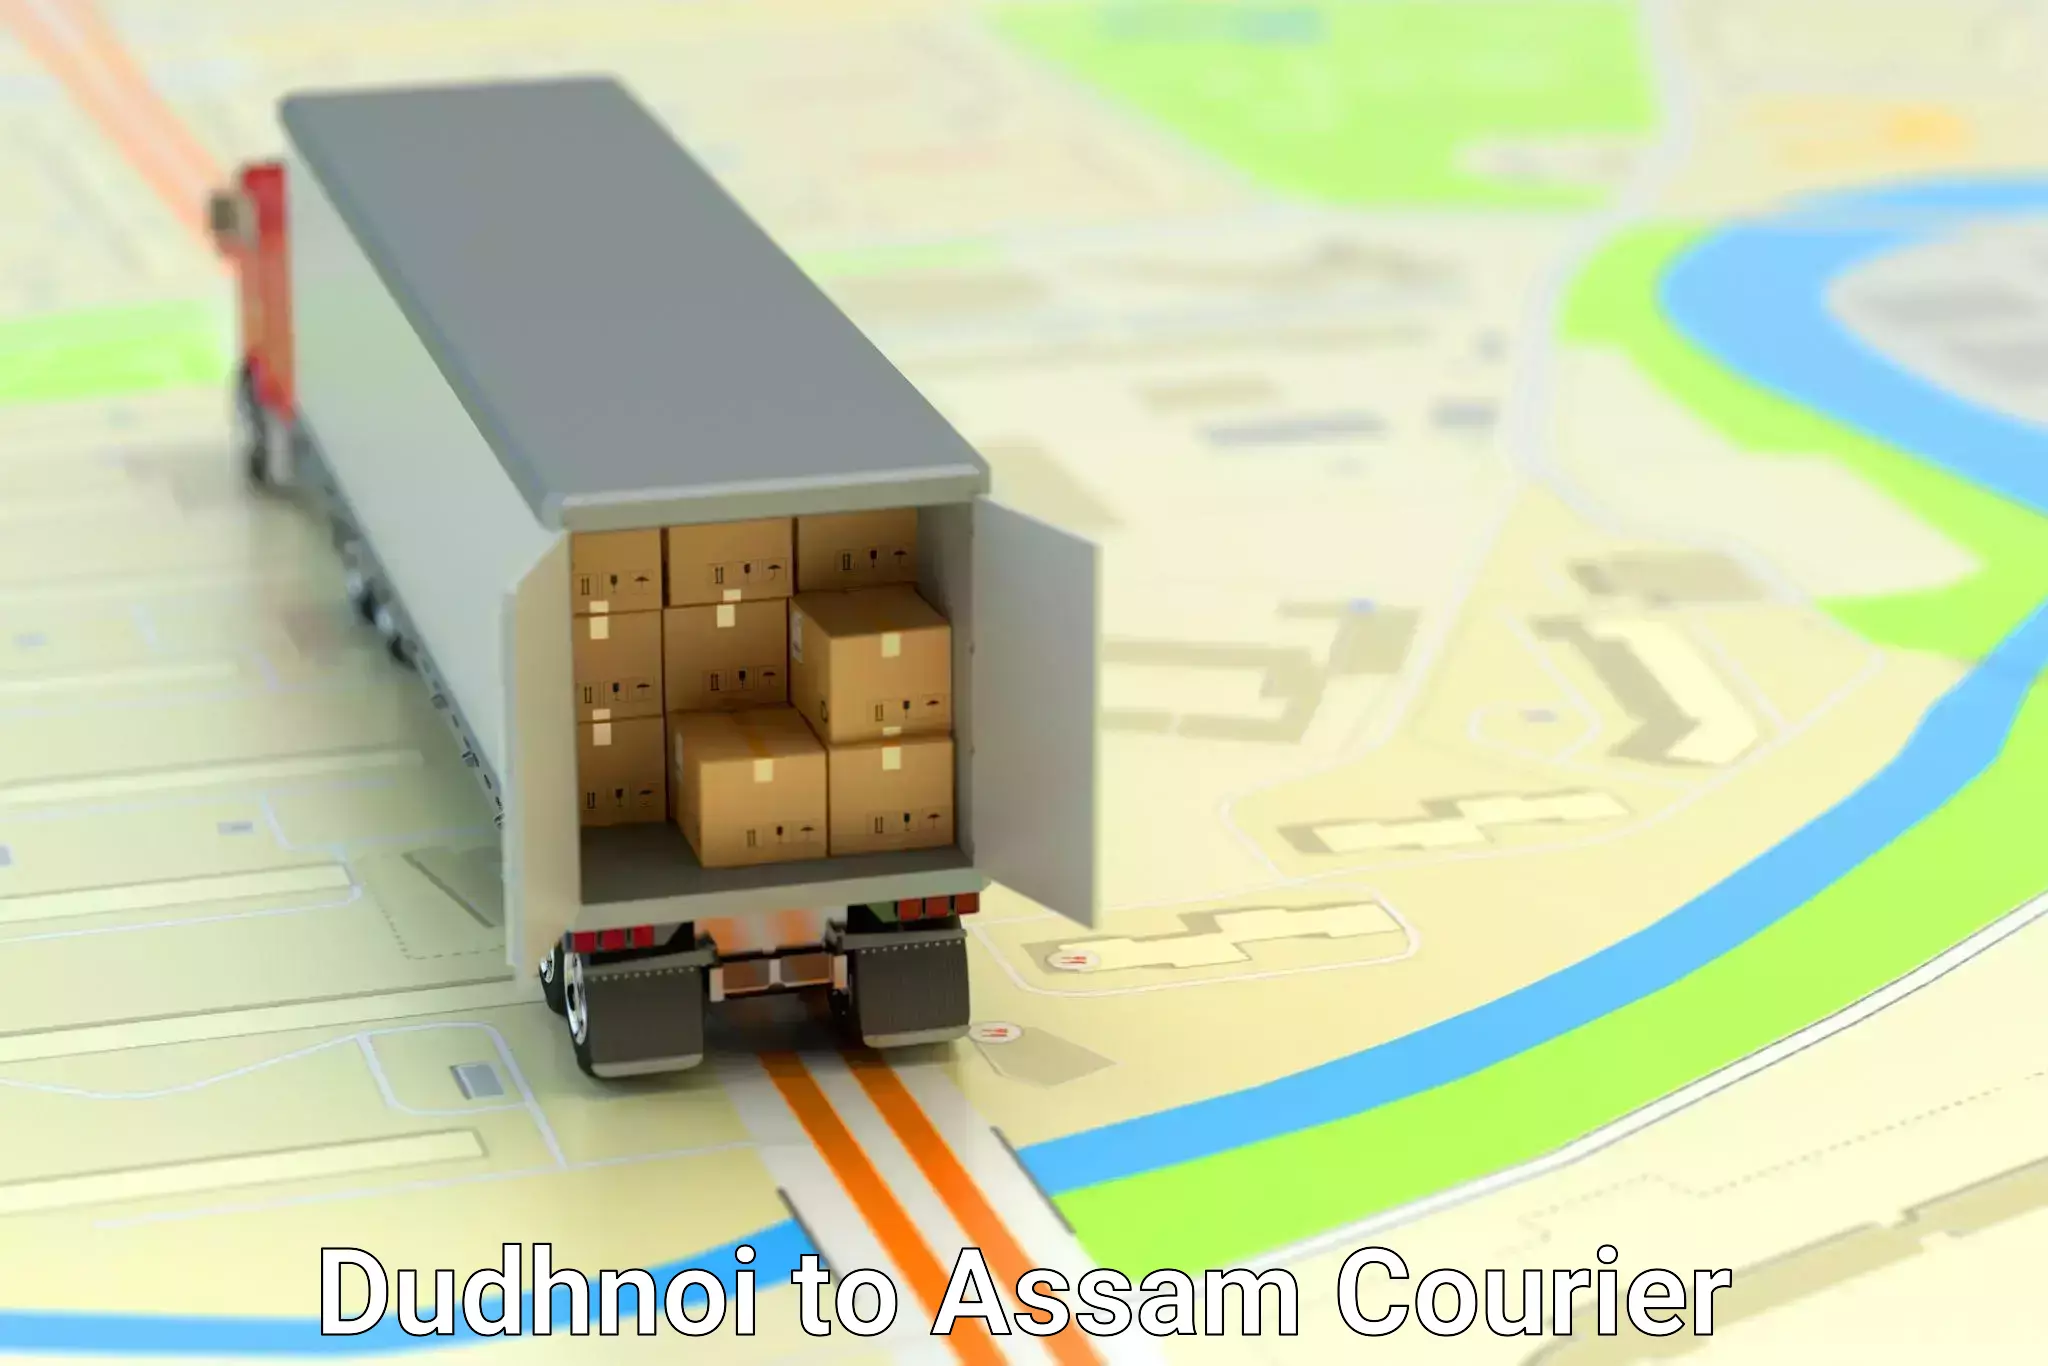 Expedited shipping methods Dudhnoi to Assam